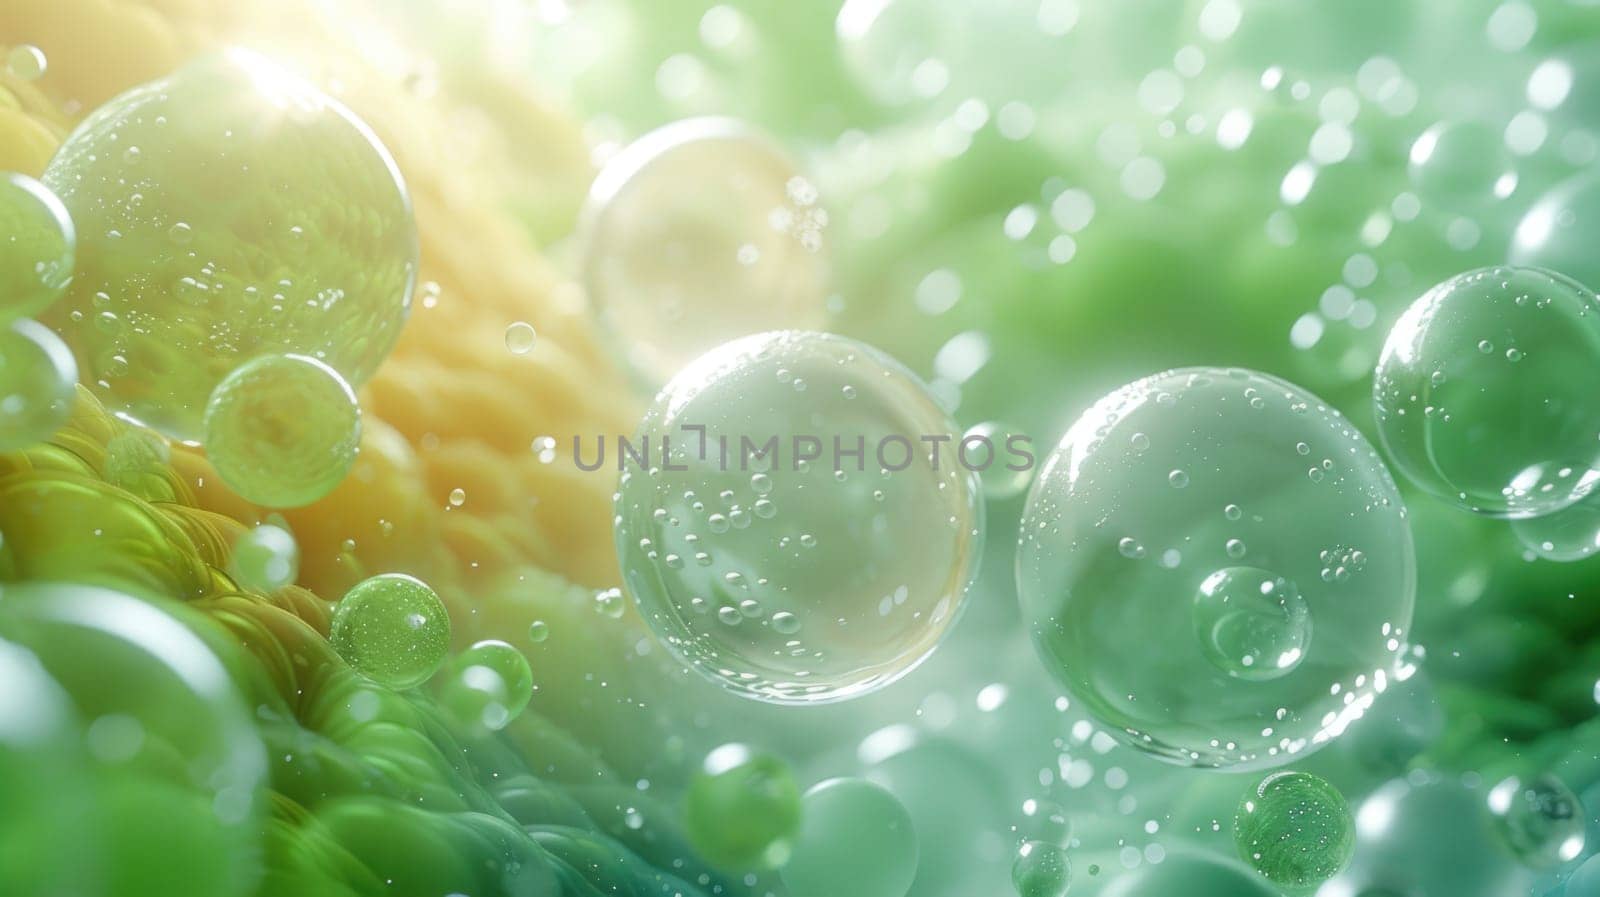 A multitude of bubbles float in the air creating a mesmerizing scene.